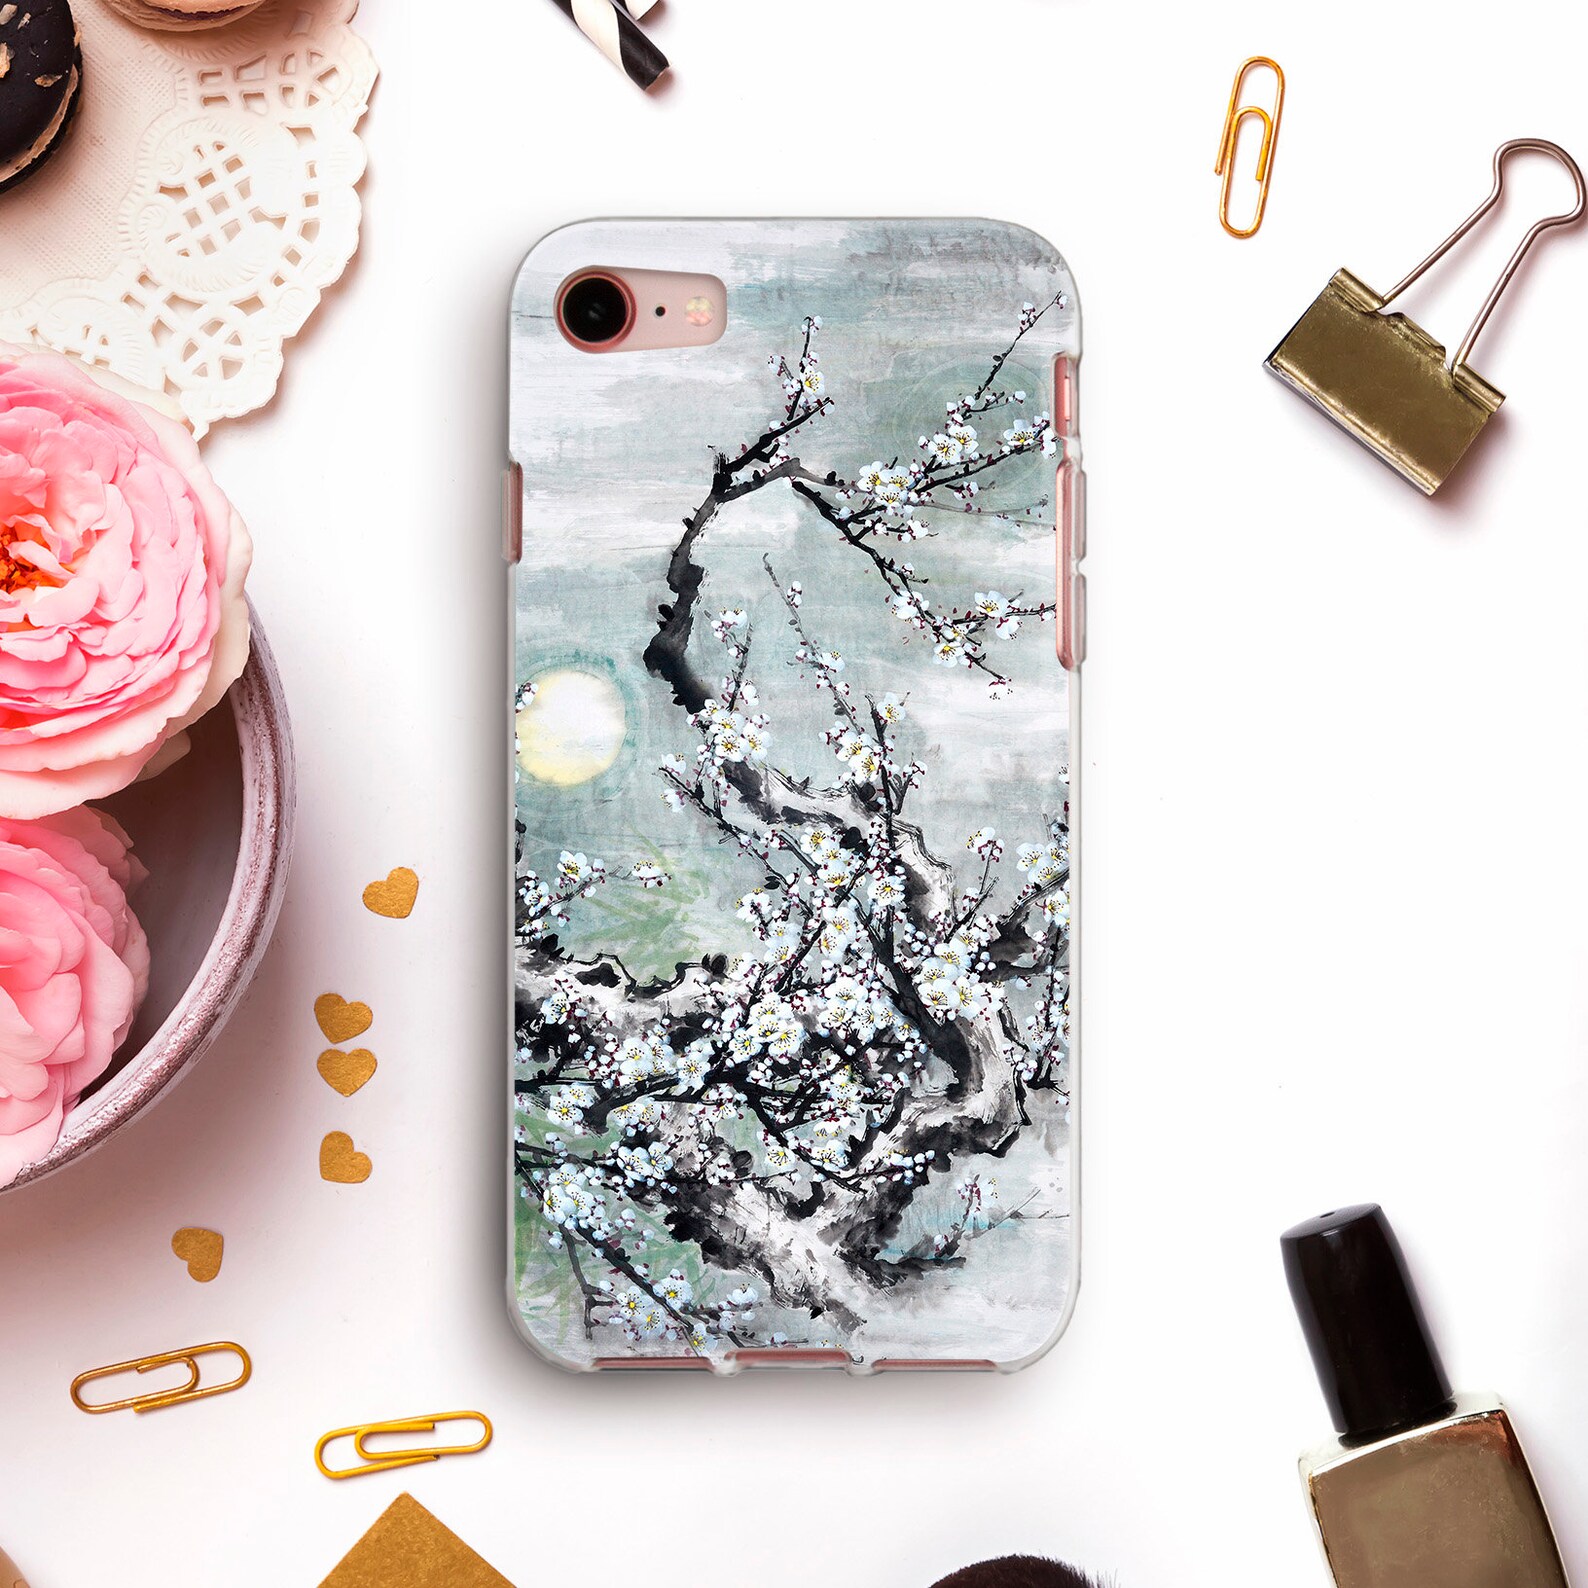 Japanese Iphone Case 11 Pro Xr Xs Art Case For Iphone 8